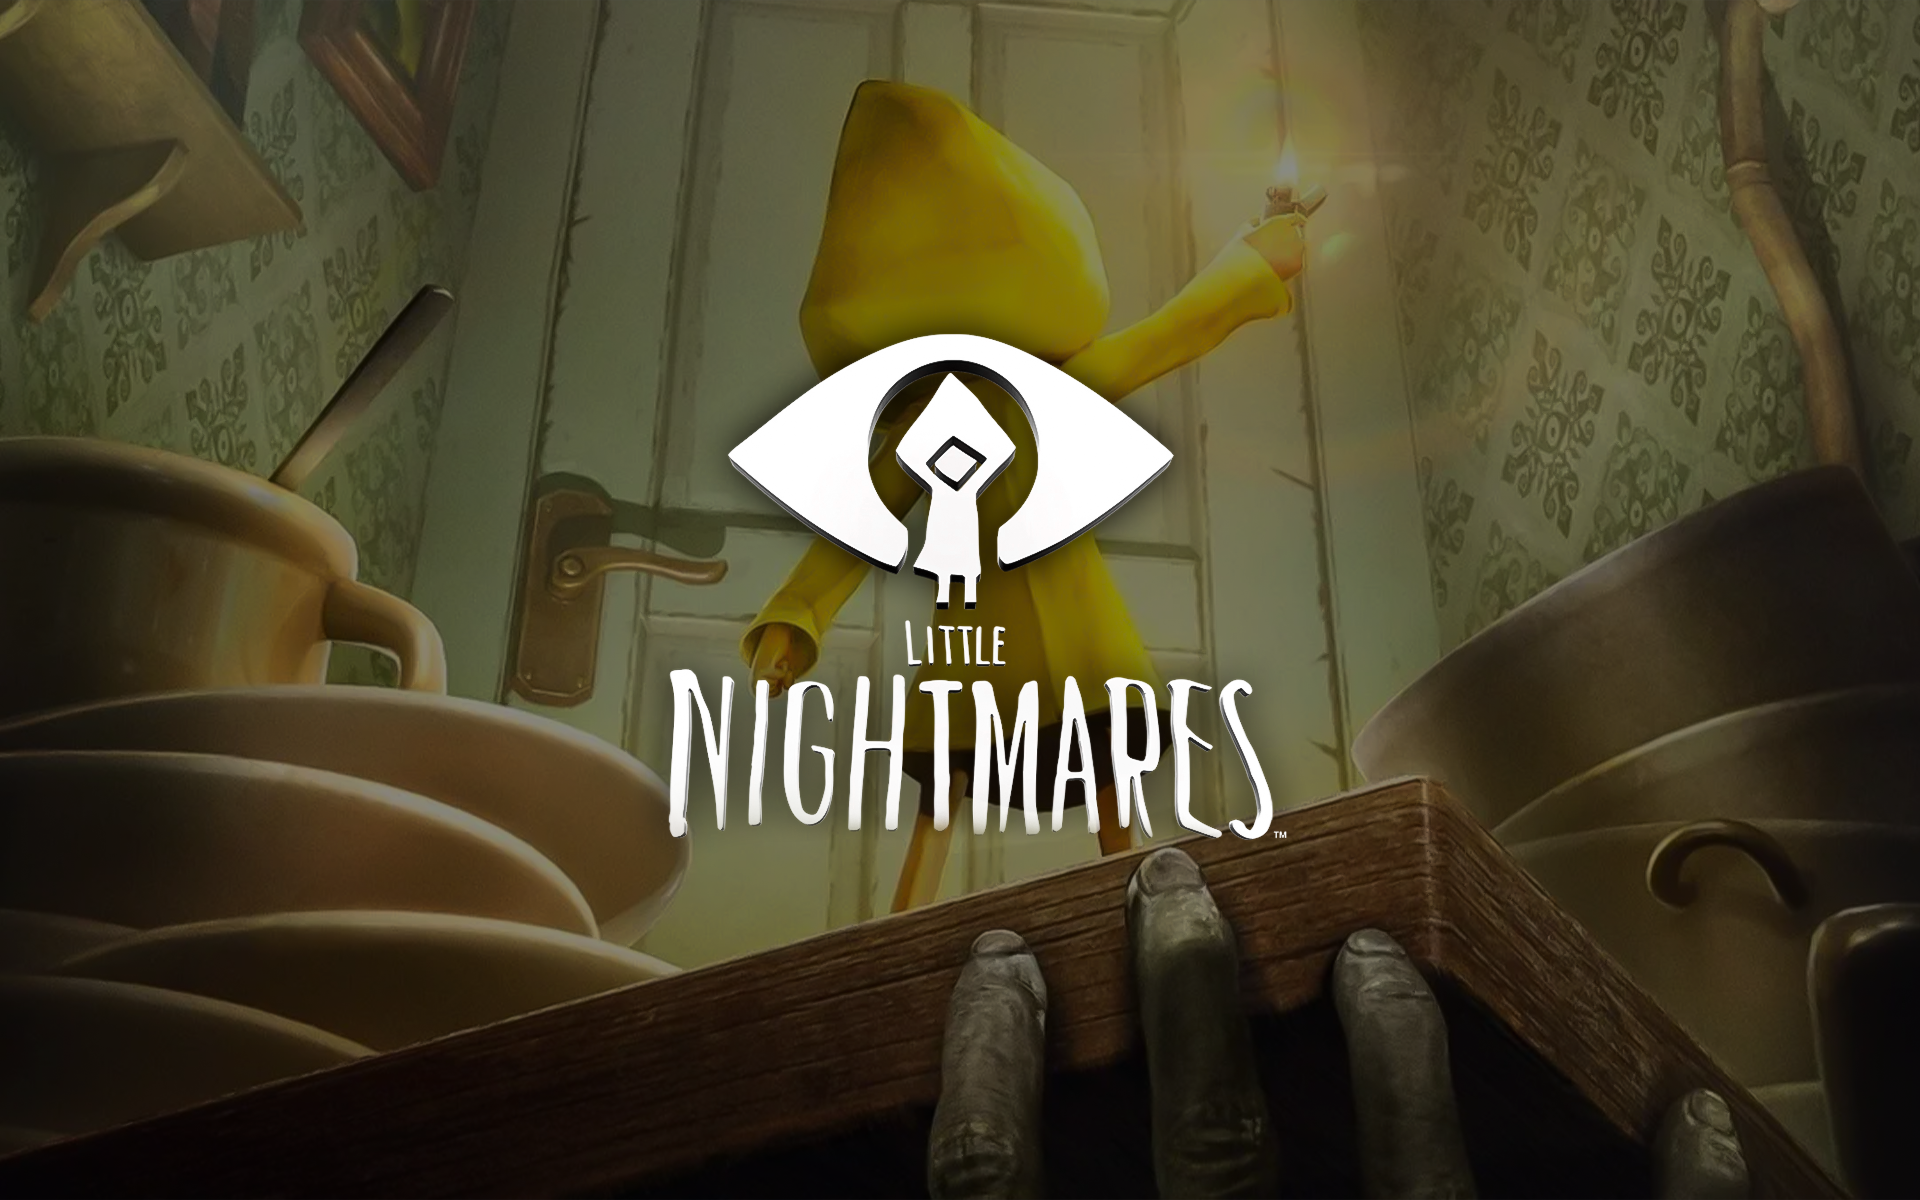 Little Nightmares is Free on Steam